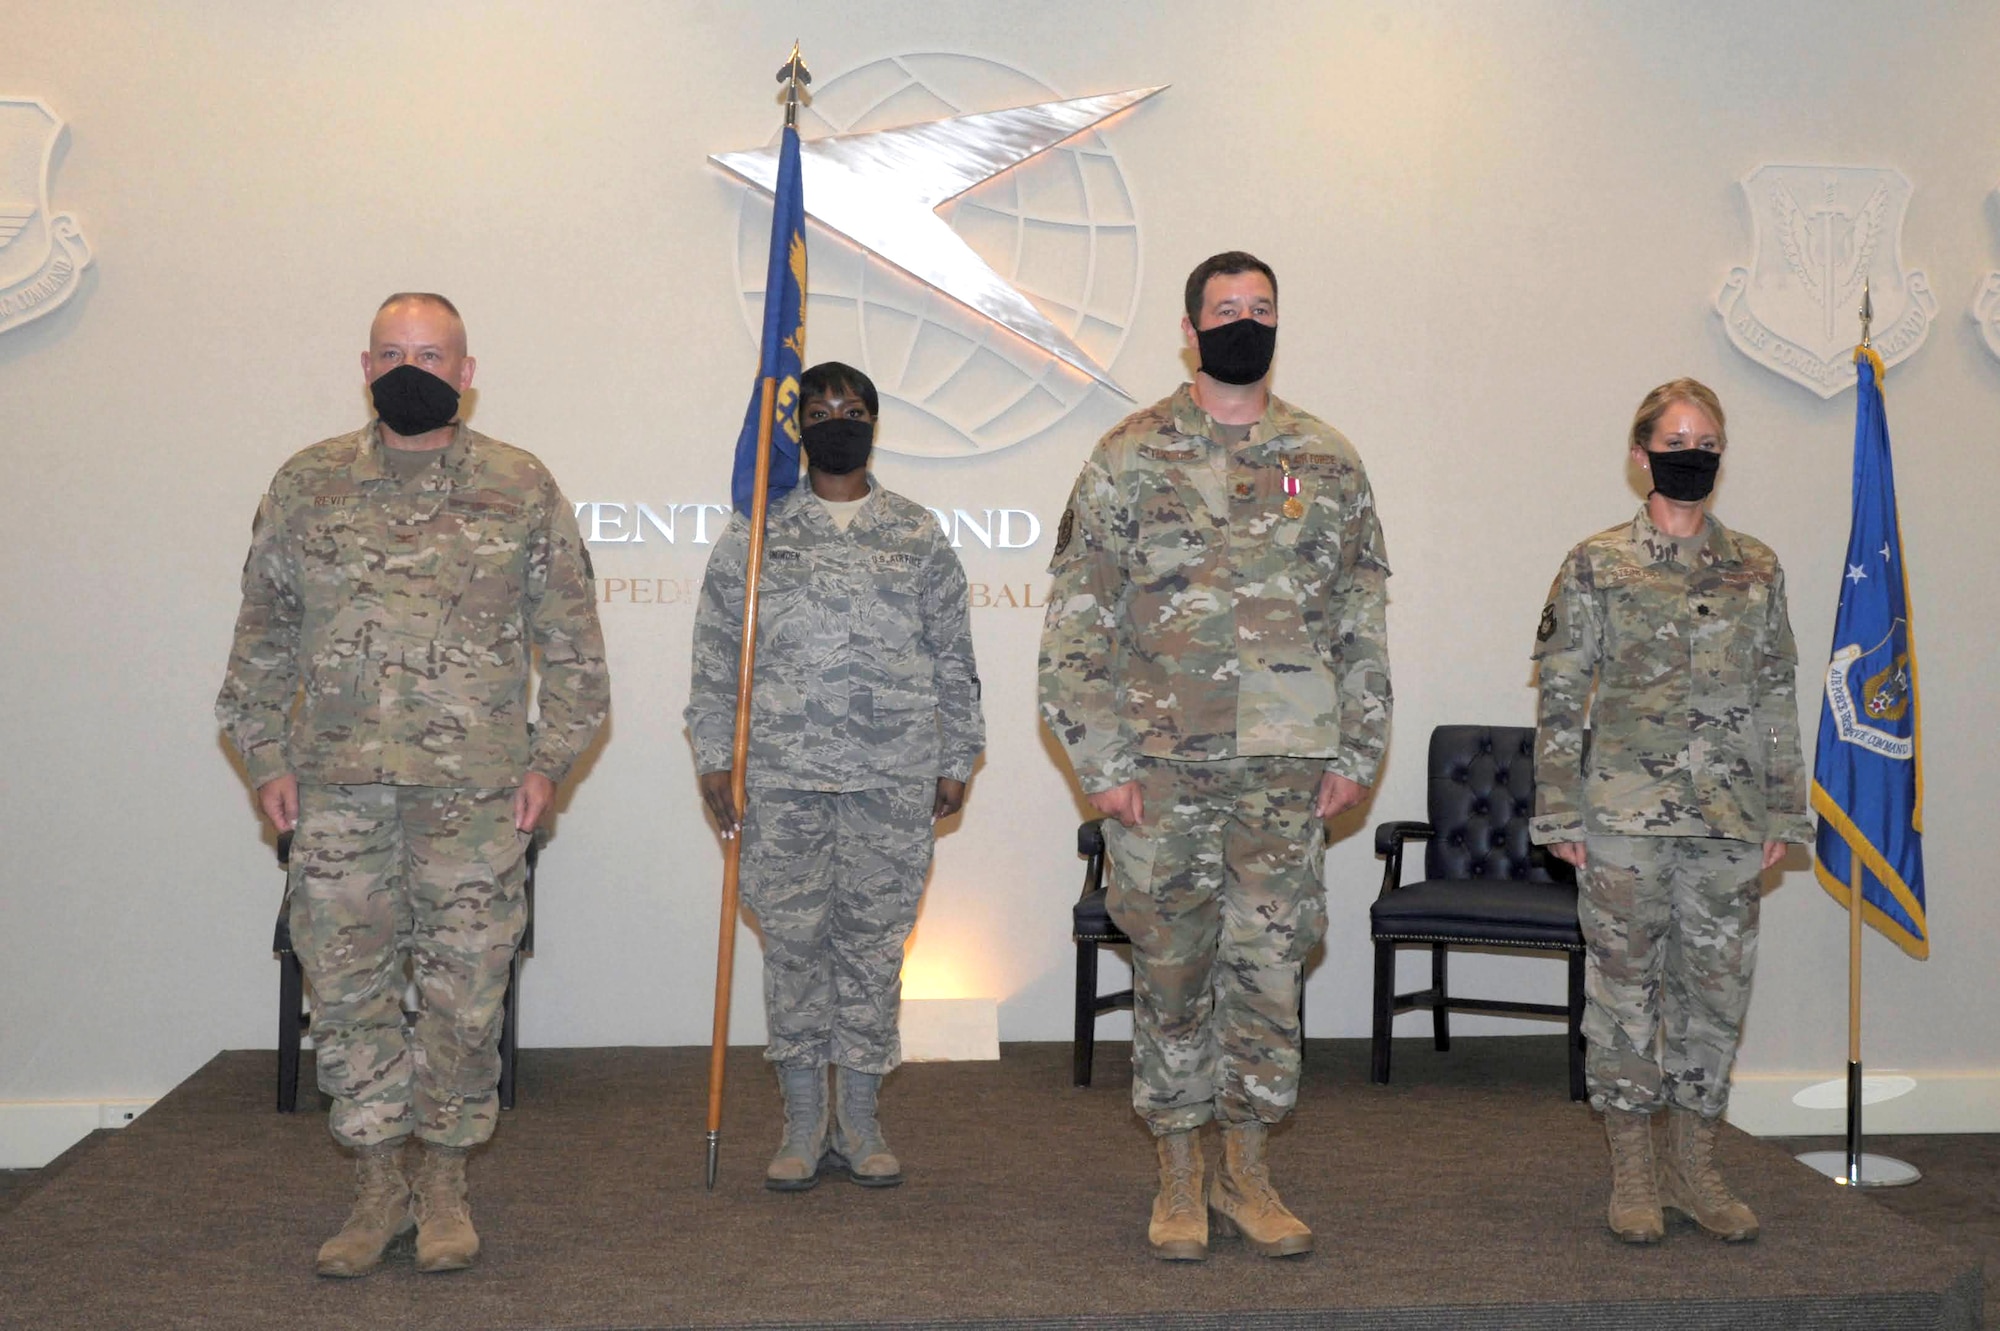 Members of the 94th Mission Support Group stand at attention Aug. 1, 2020, at the 22nd Air Force Headquarters, for the 4th Civil Engineer Squadron’s change of command ceremony. Lt. Col. Emily Steinfort took command from Maj. Joseph Thomas. (U.S. Air Force photo by Senior Airman Shelby Thurman)